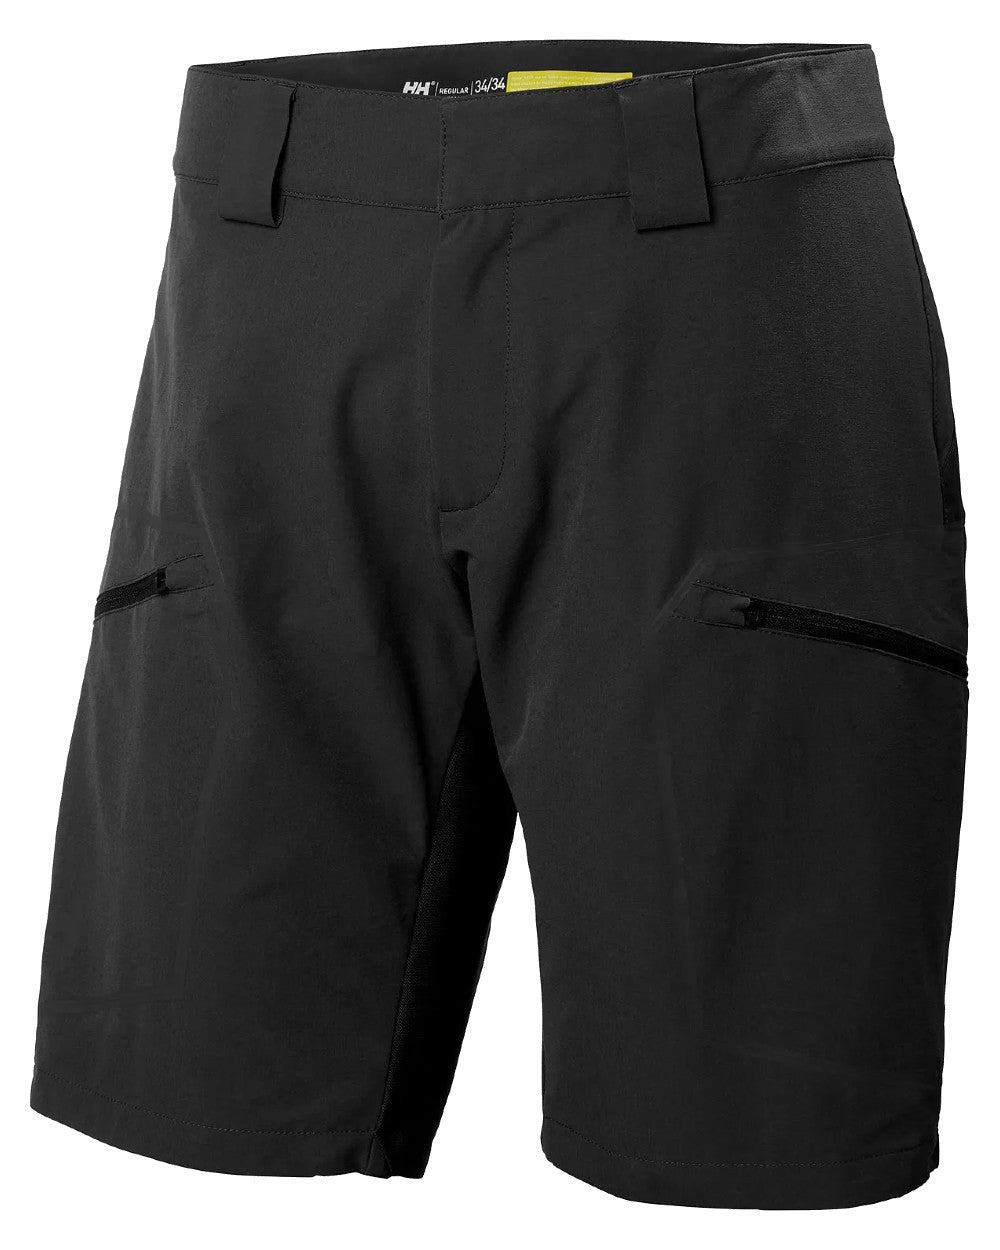 Ebony coloured Helly Hansen Mens HP Racing Deck Shorts on white background 